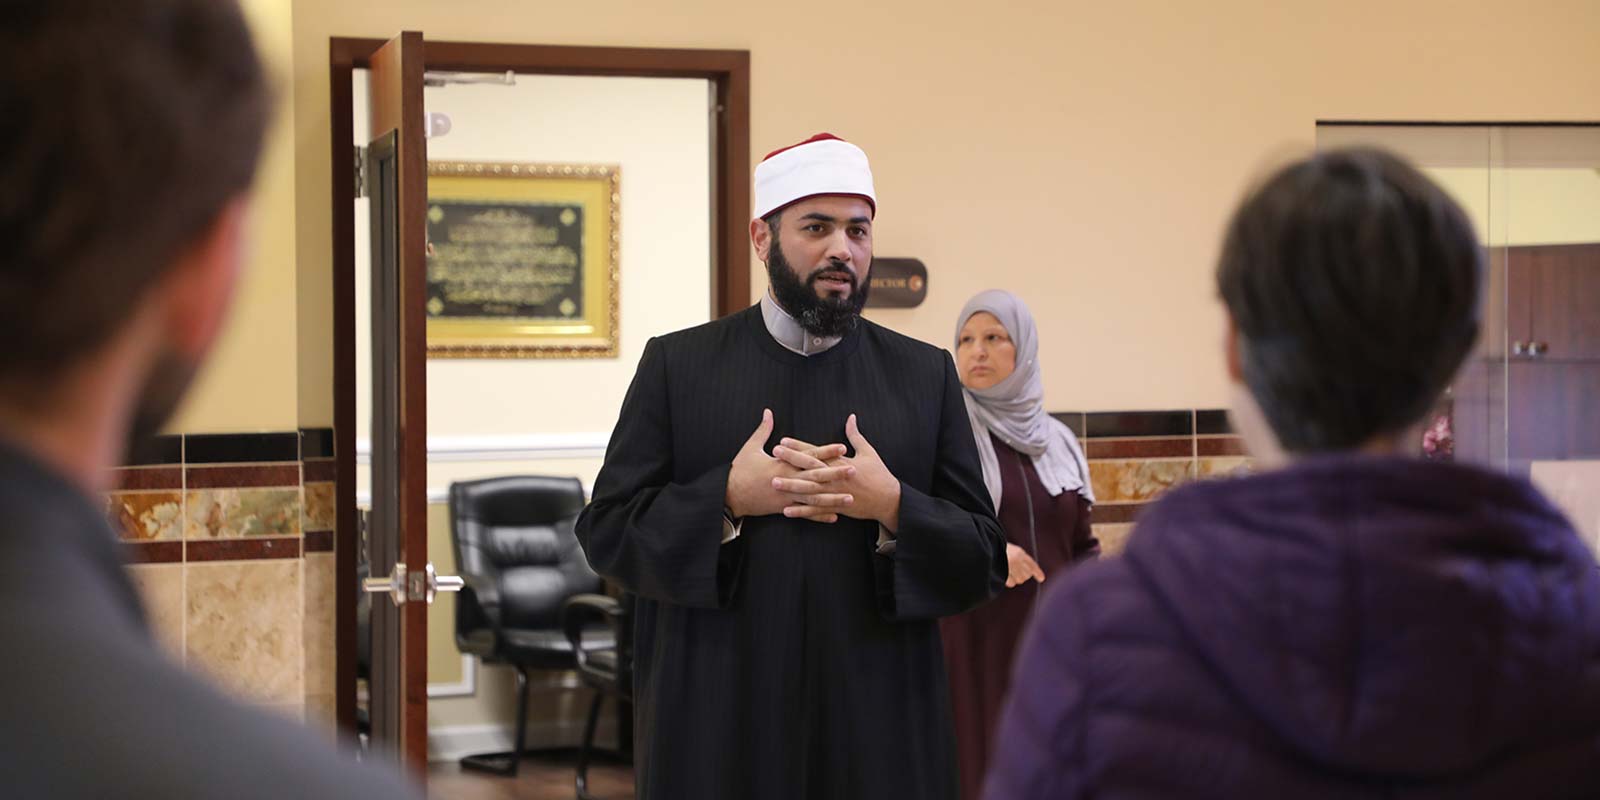 Hassan Aly speaking at The Mecca Center during the Interfaith Trolly Tour.